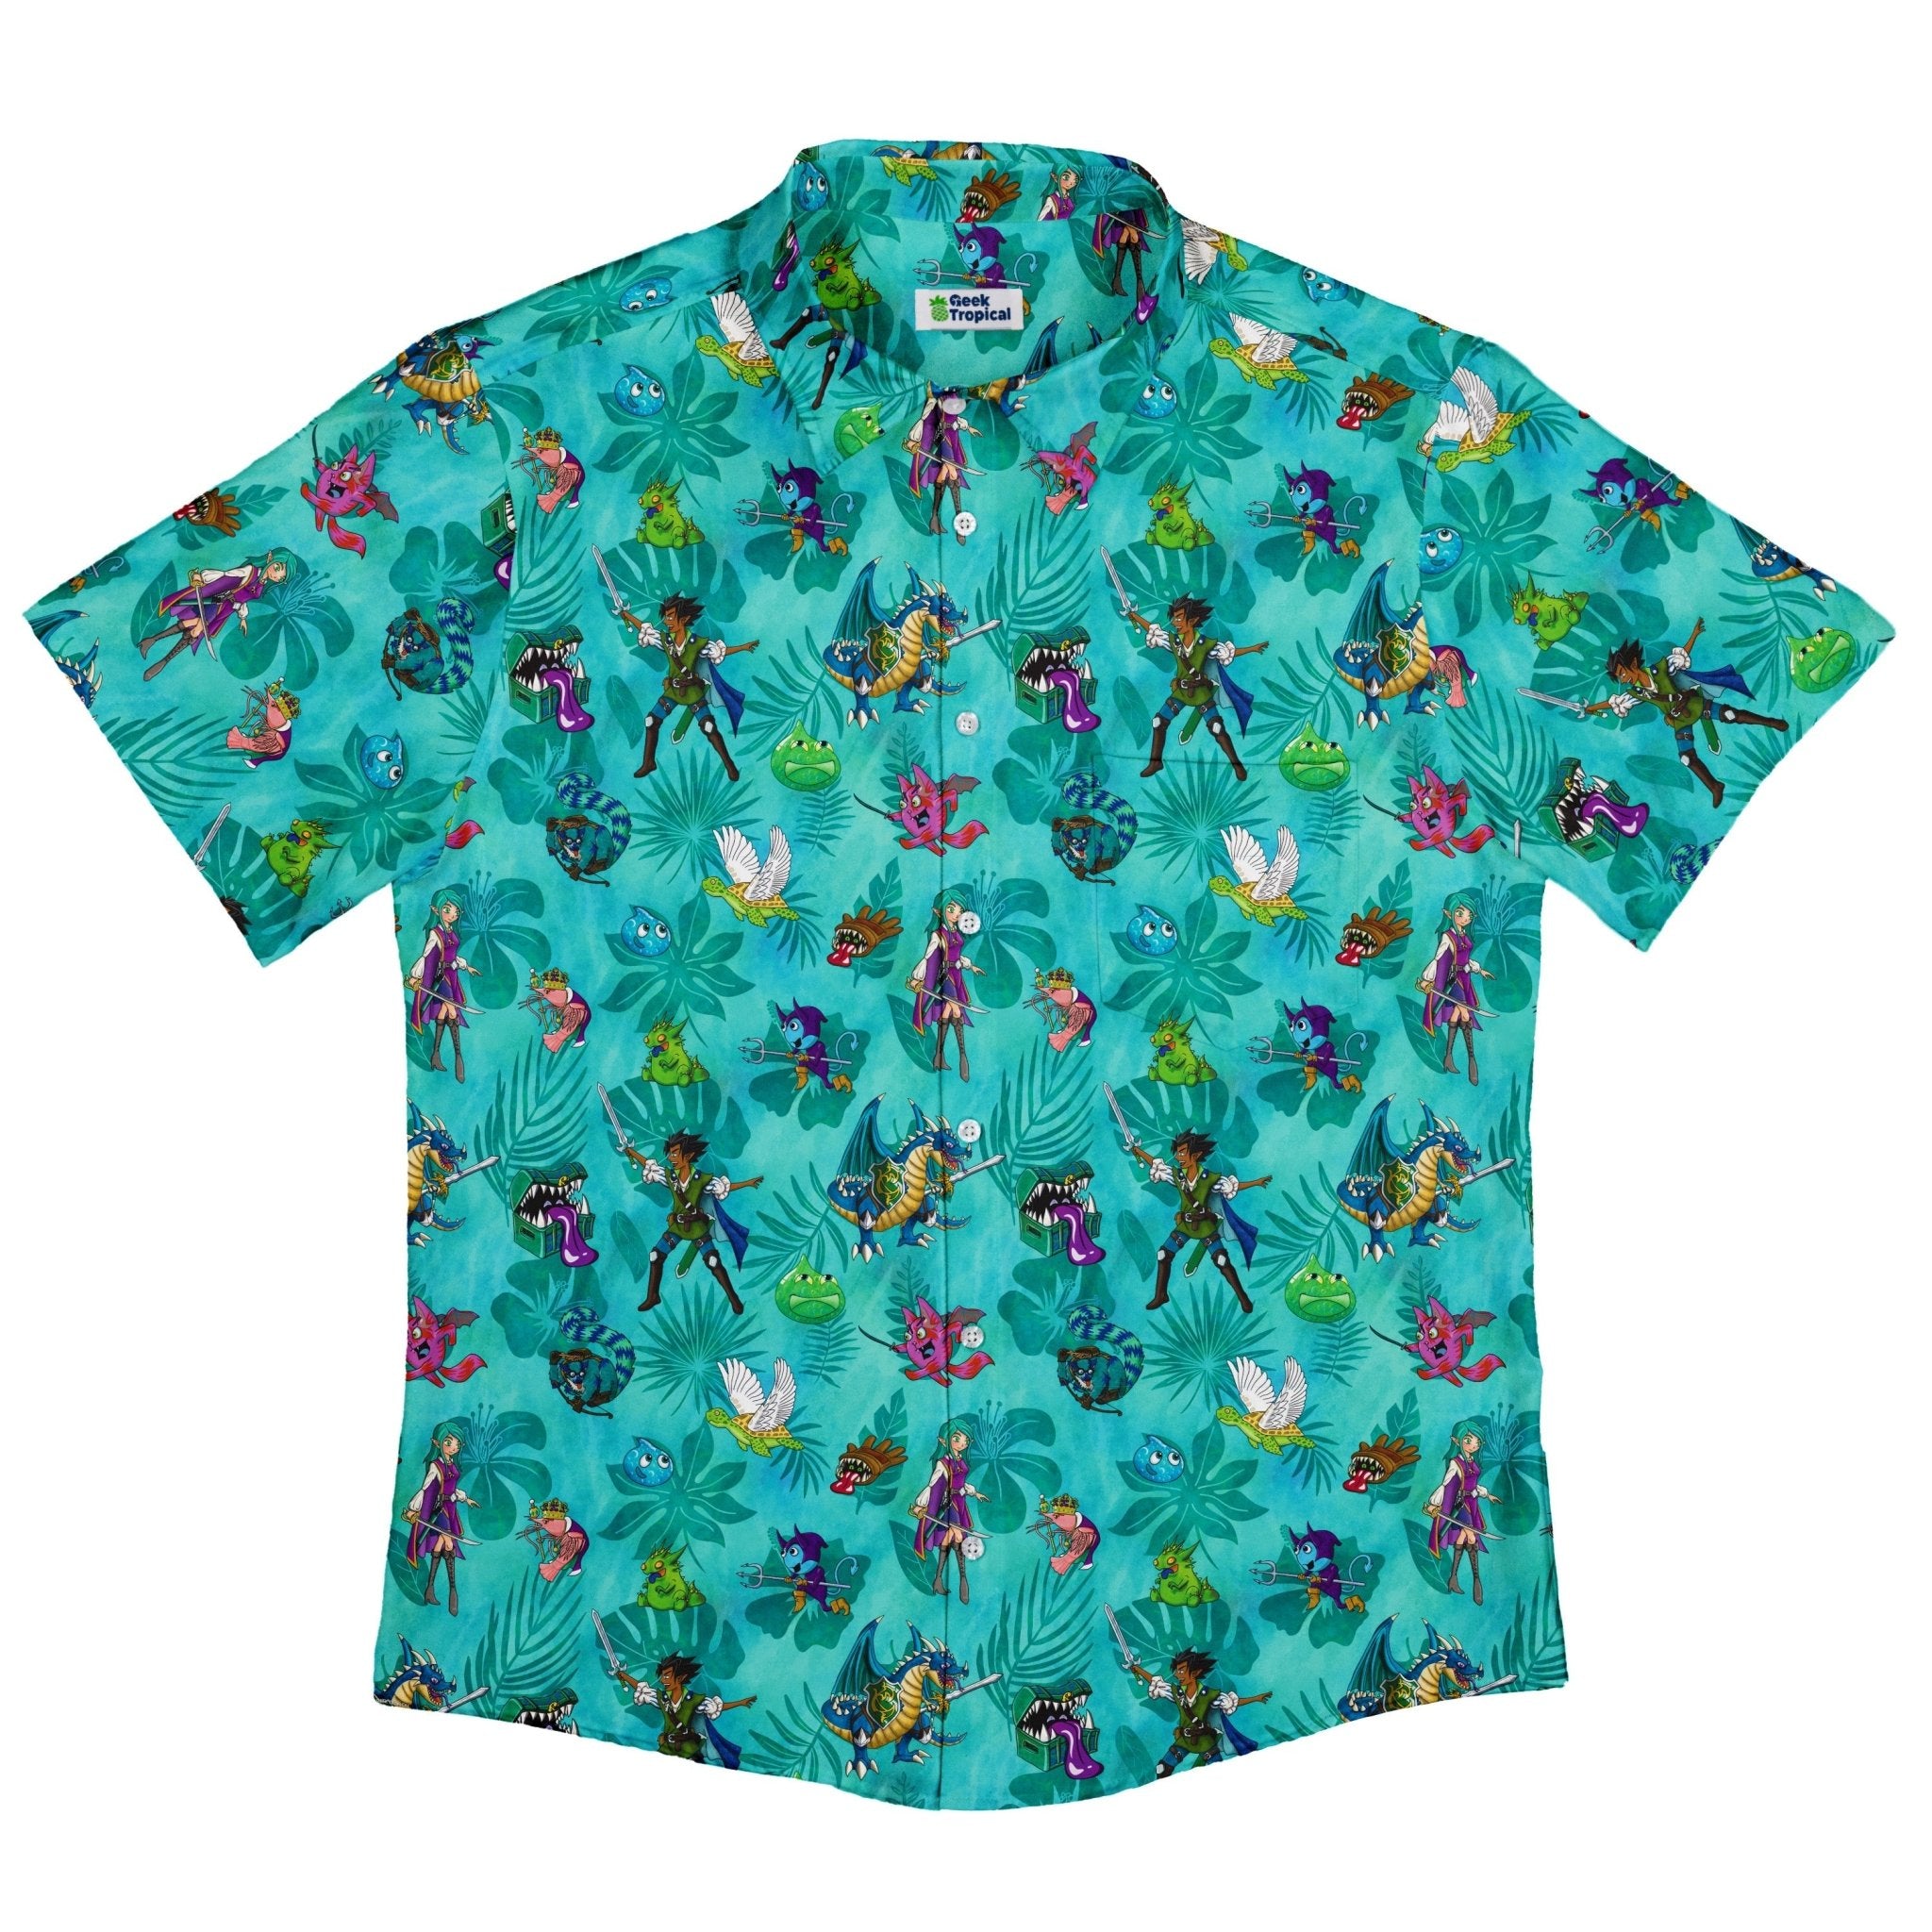 Dnd Cartoon Quest Button Up Shirt - adult sizing - Designs by Nathan - dnd & rpg print